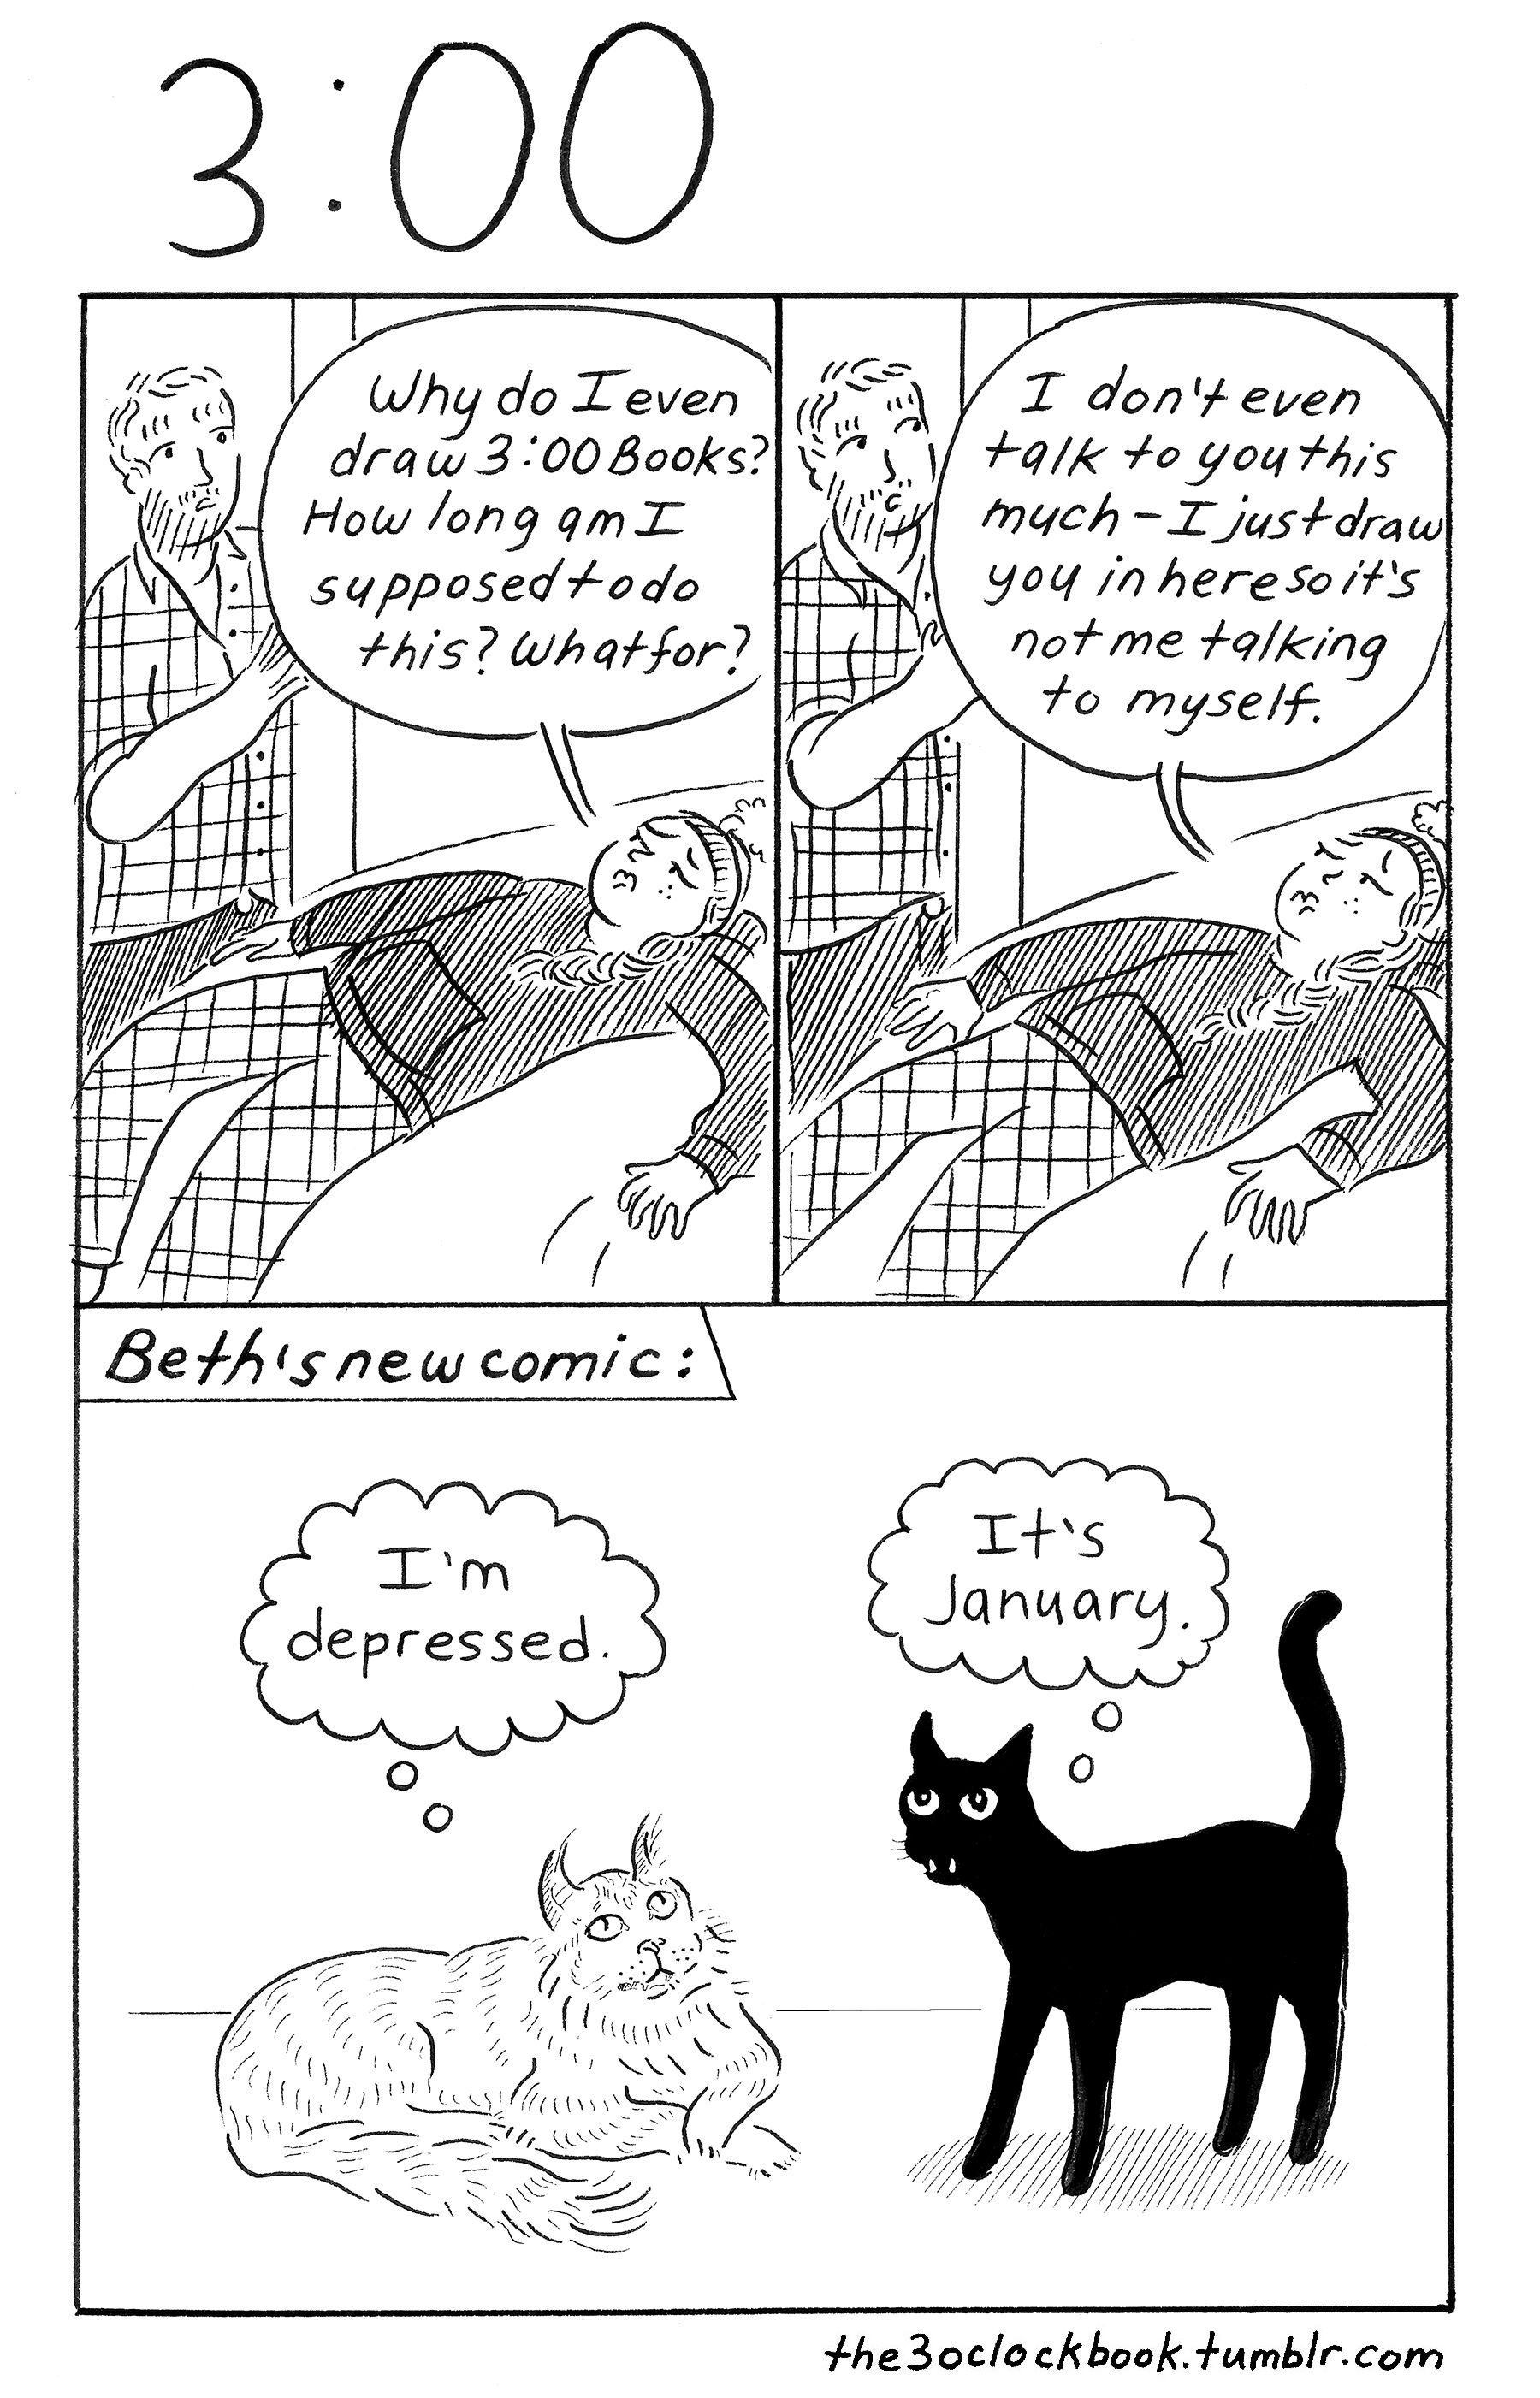 Beth Heinly's comic, The 3:00 Book, with Gus and two cats